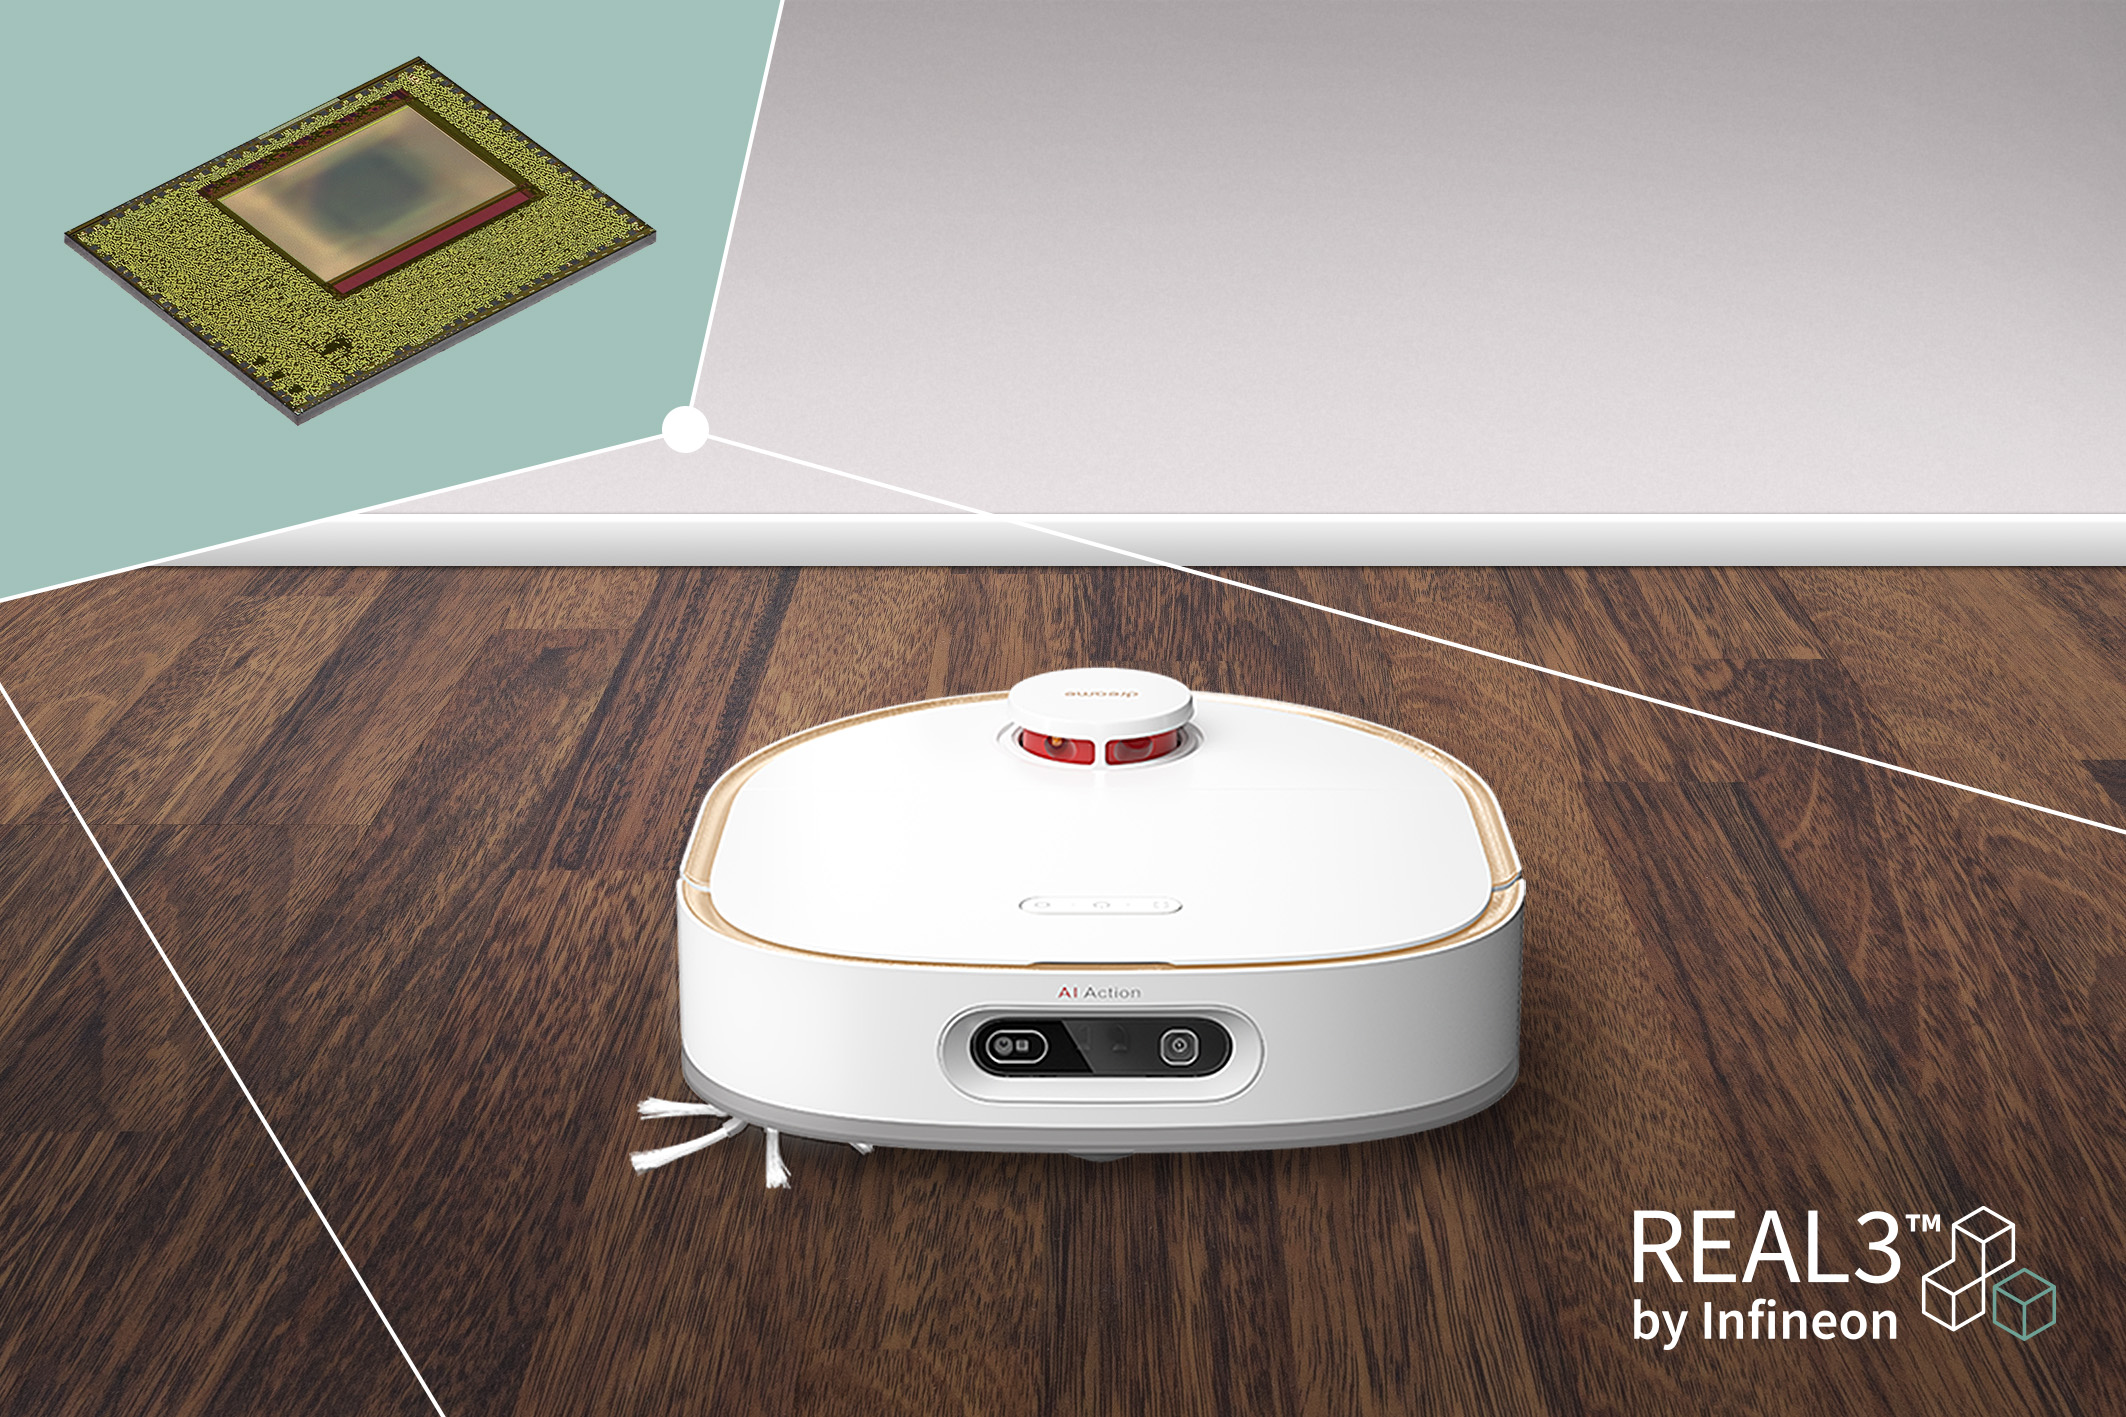 ToF Imager Enables Advanced Obstacle Avoidance and Smart Navigation in Vacuum Cleaning Robot